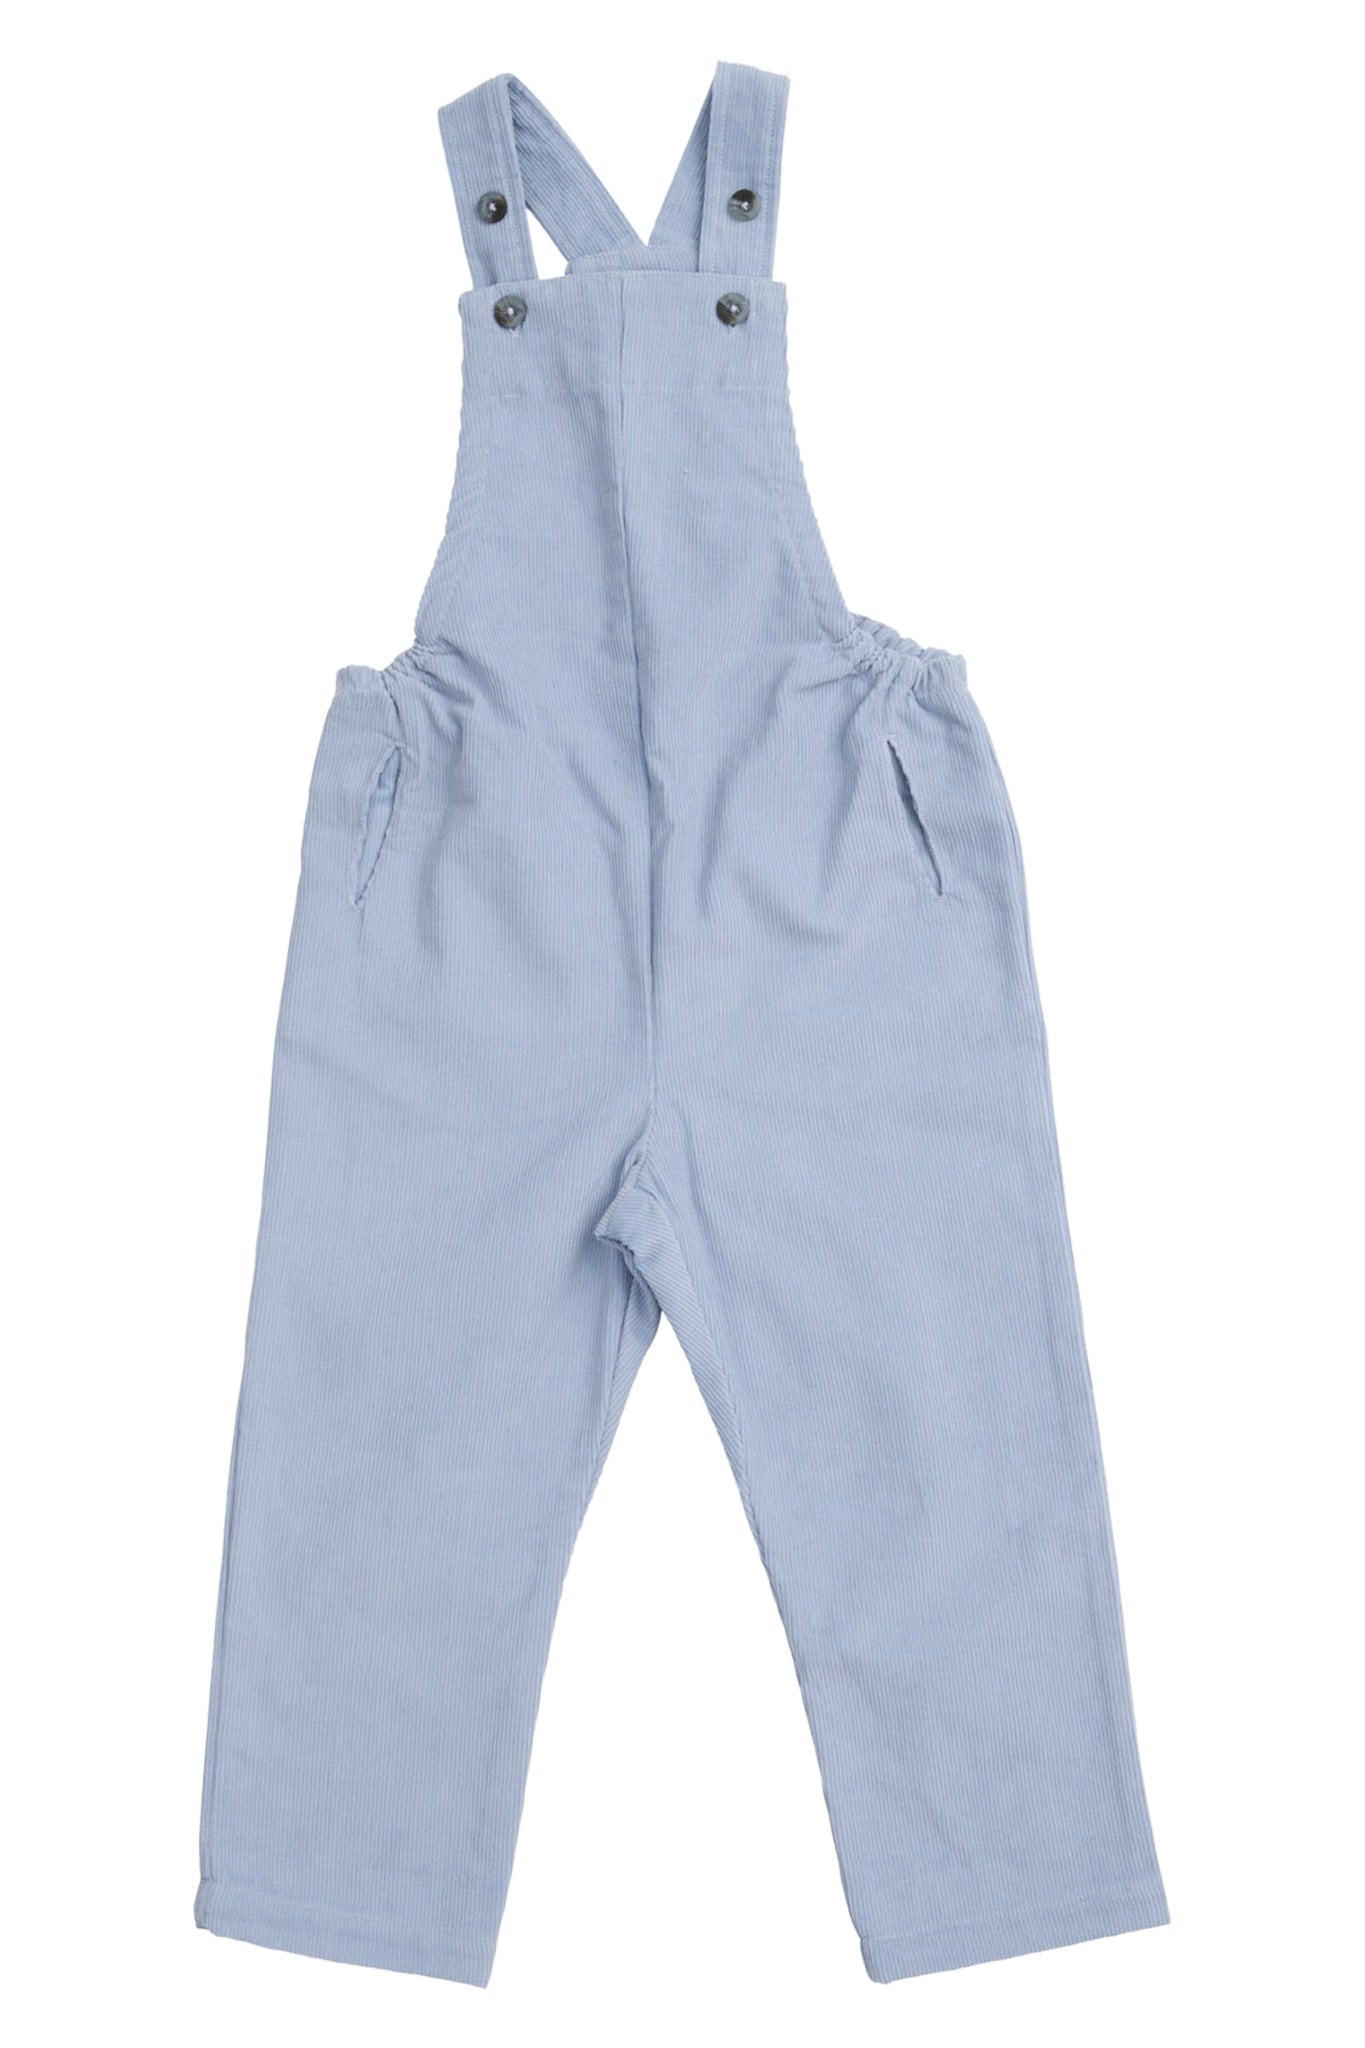 CORDUROY JUNIOR OVERALL - DUSTY BLUE